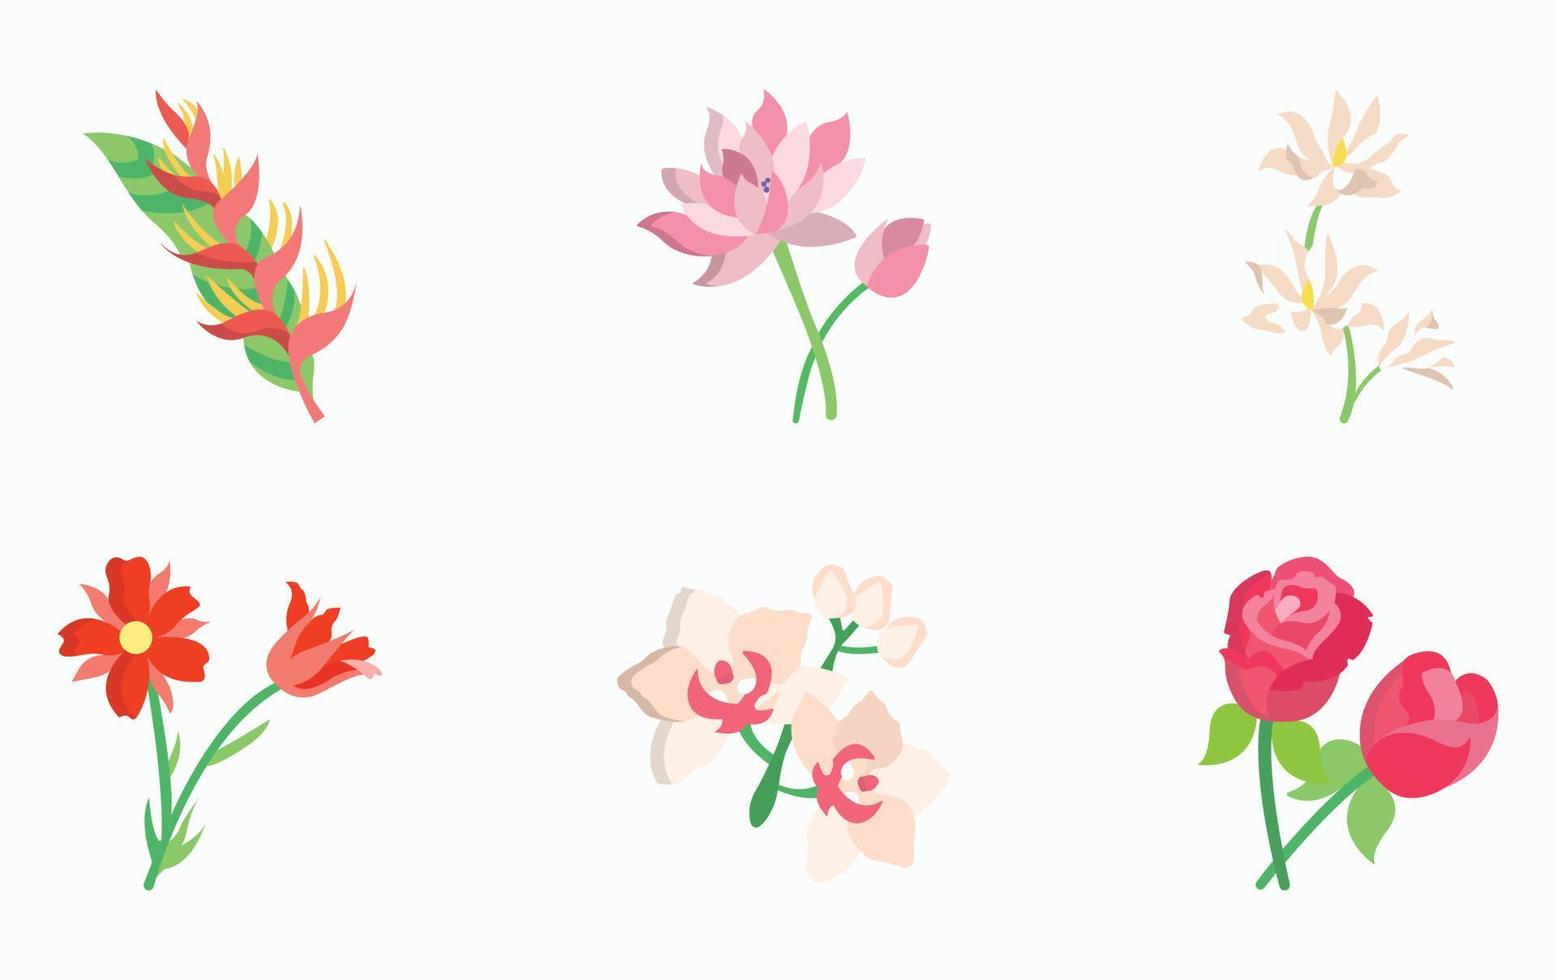 Flowers and petals icon set vector